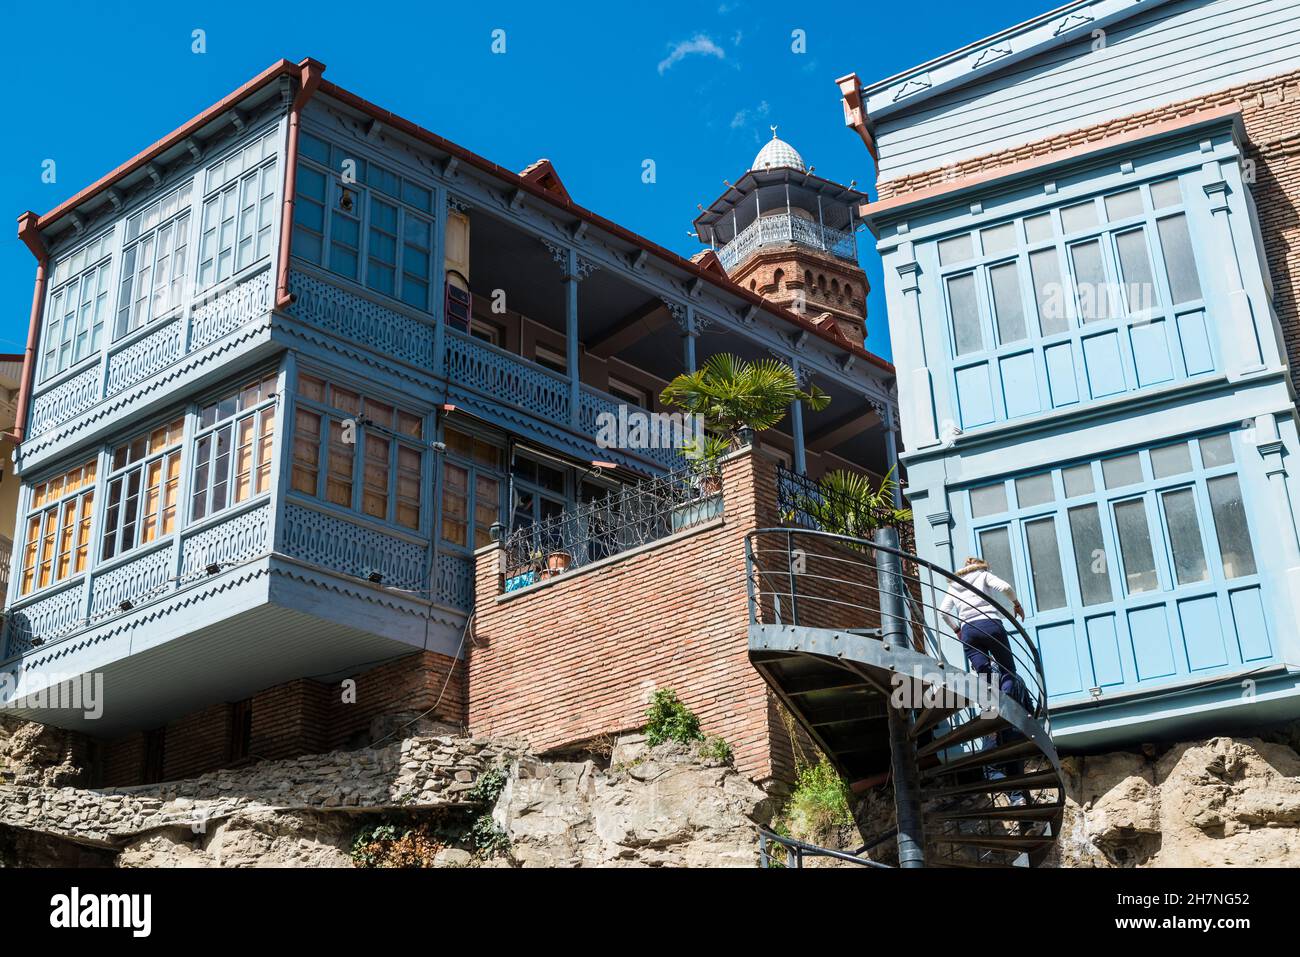 Historic wooden houses with open, carved balconies in the Abanotubani area  of the Old Town of Tblisi, Georgia, Caucasus. Stock Photo